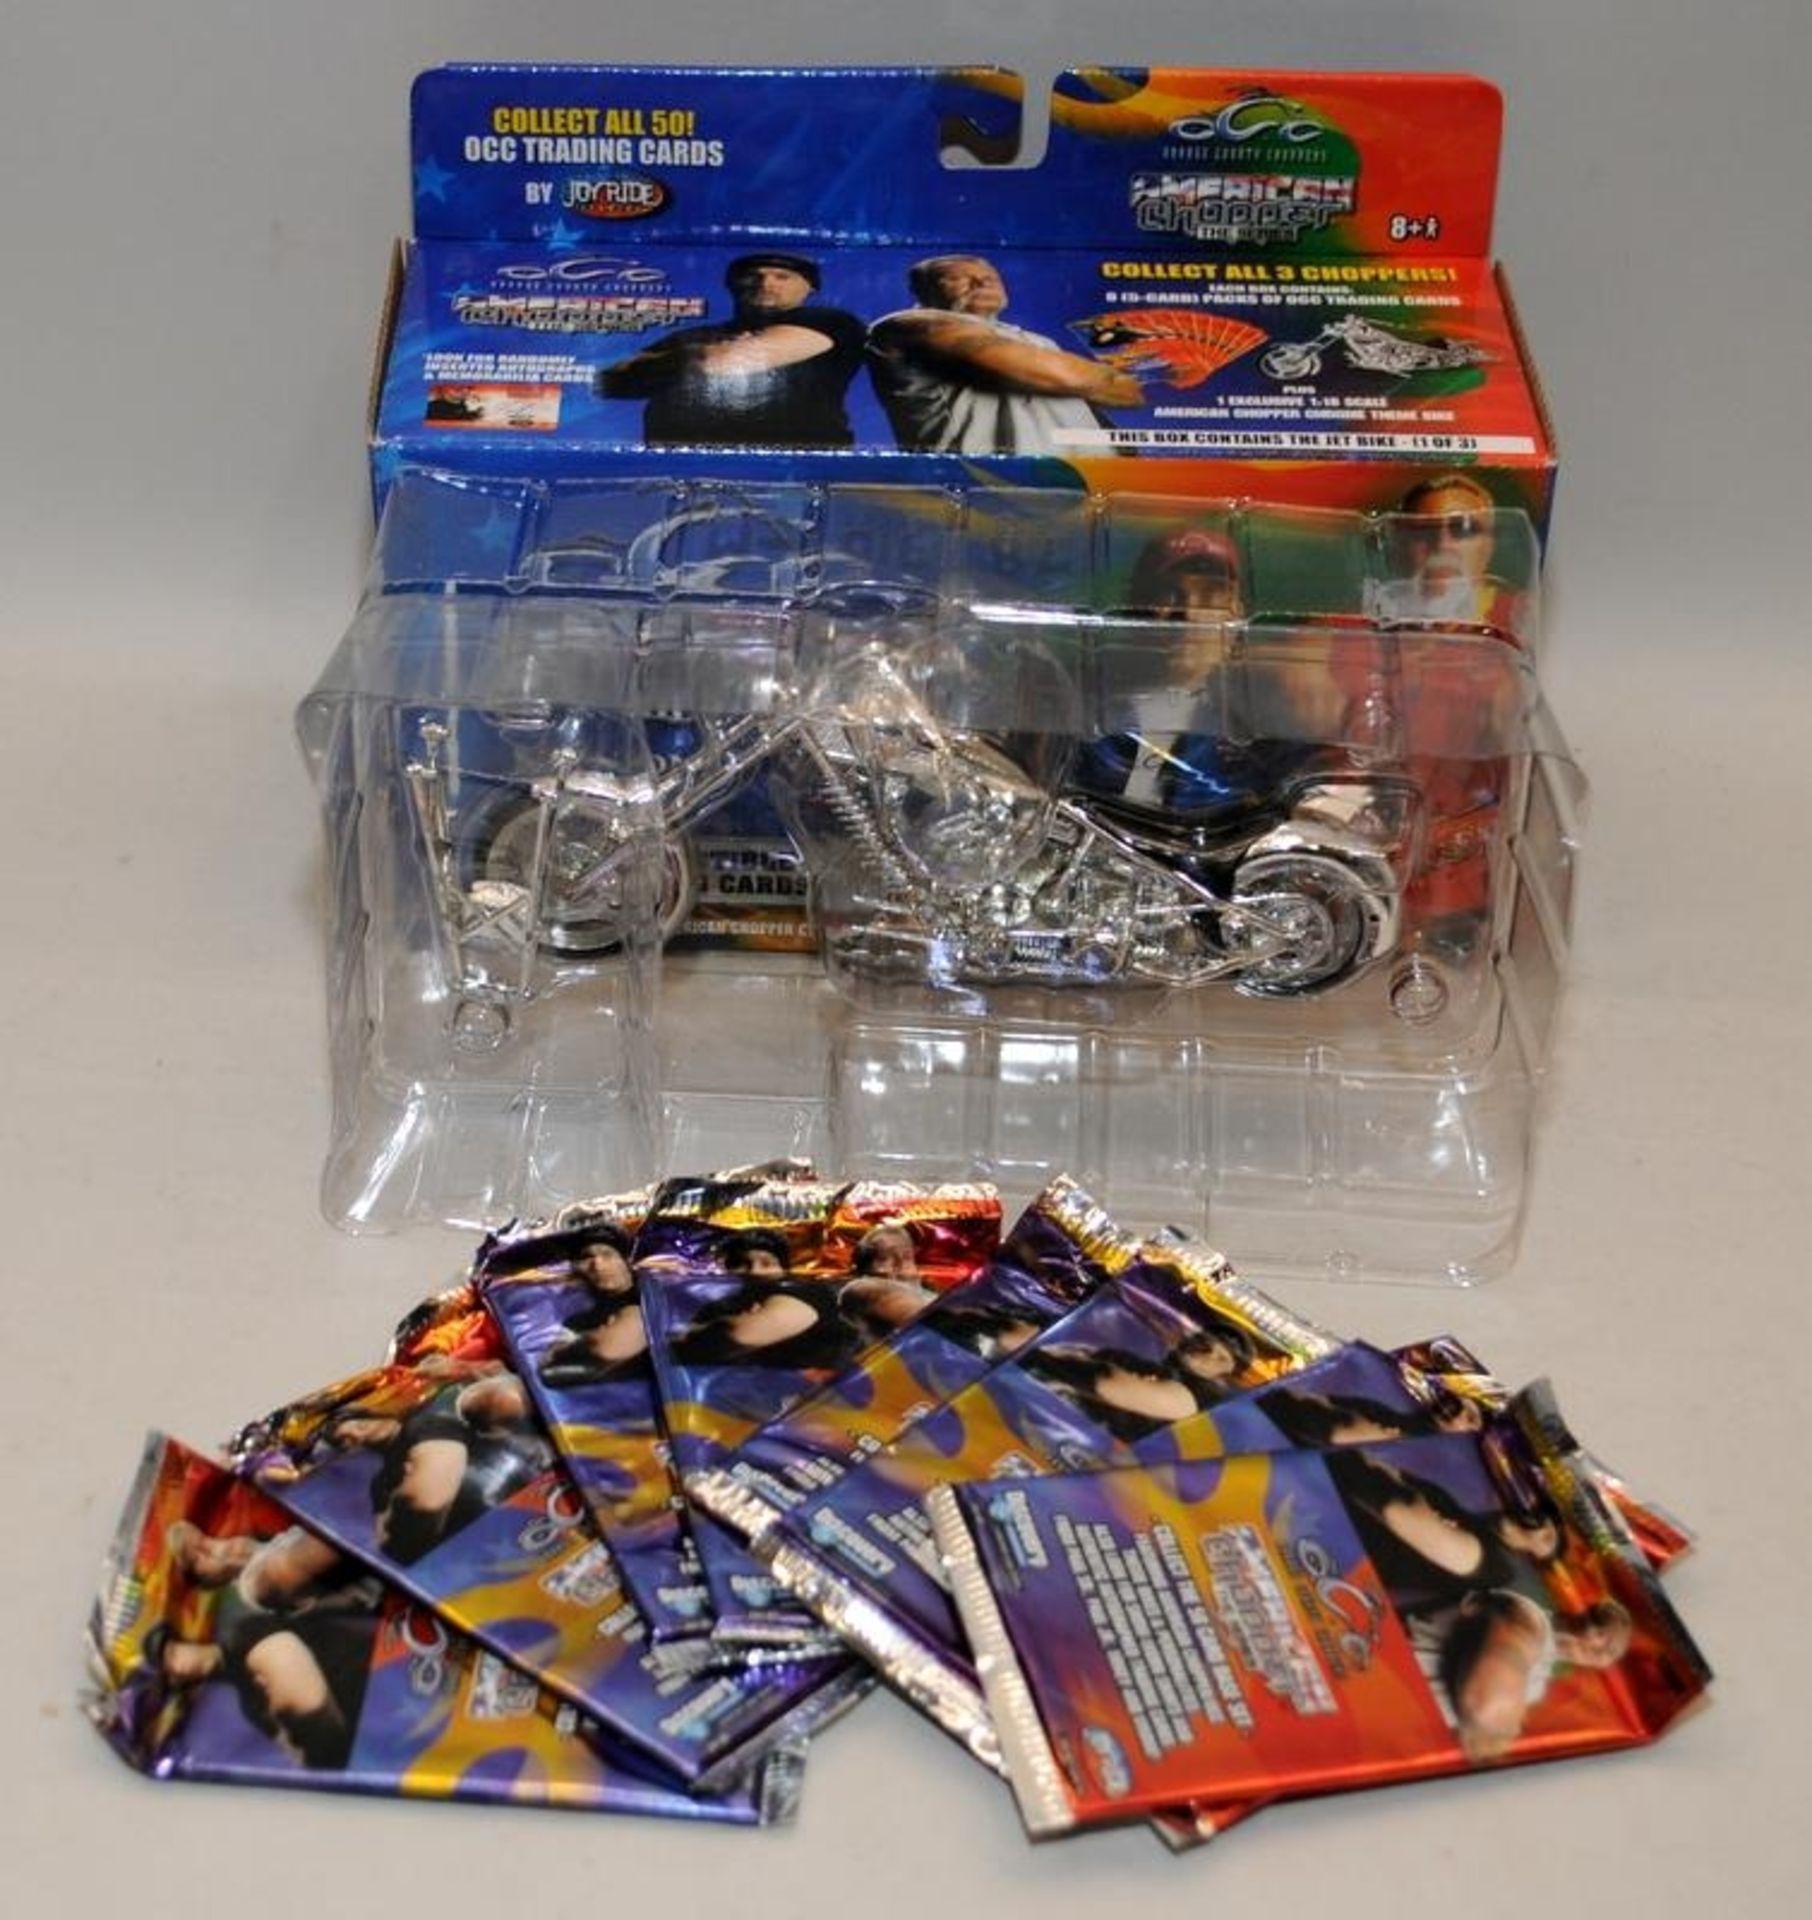 Collection of Nascar etc die-cast model racing cars c/w American Choppers series bike c/w trading - Image 4 of 4